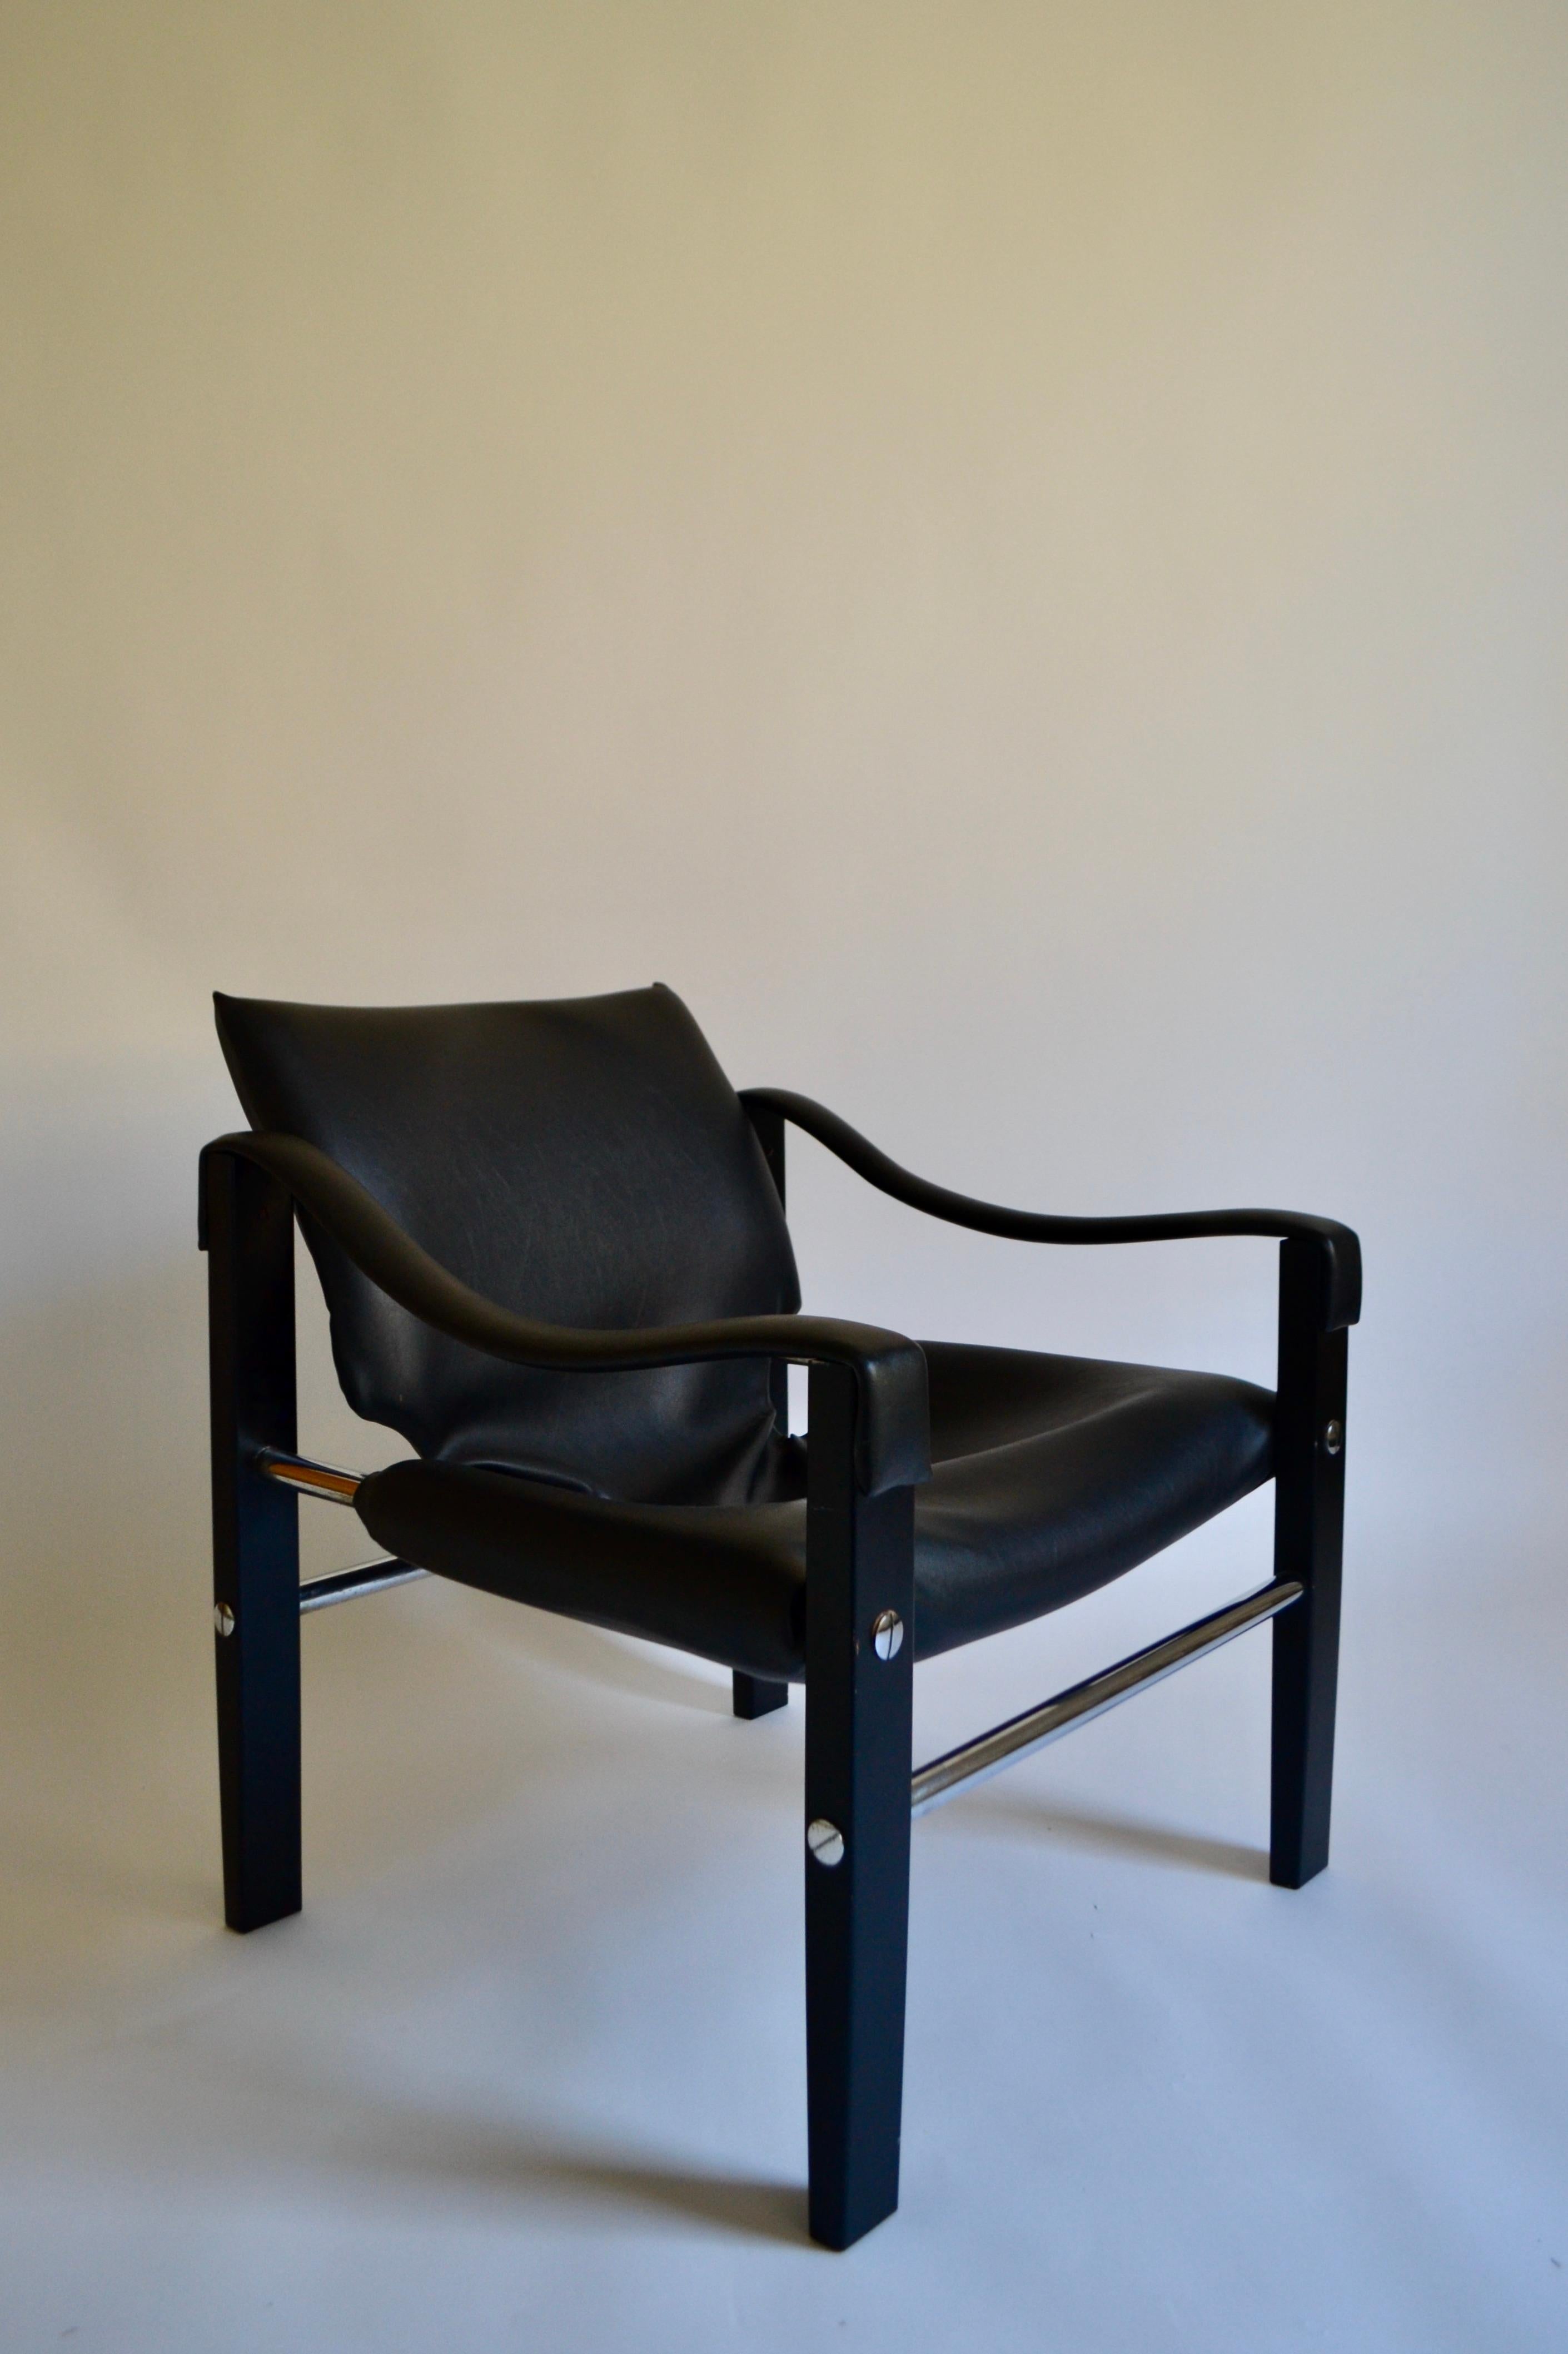 Black vinyl safari chair on metal frame designed by Maurice Burke for British furniture manufacturer Arkana in the 1980s. Original vinyl upholstery in excellent condition with small scuffs to metal legs as pictured. Makers stamp embossed to